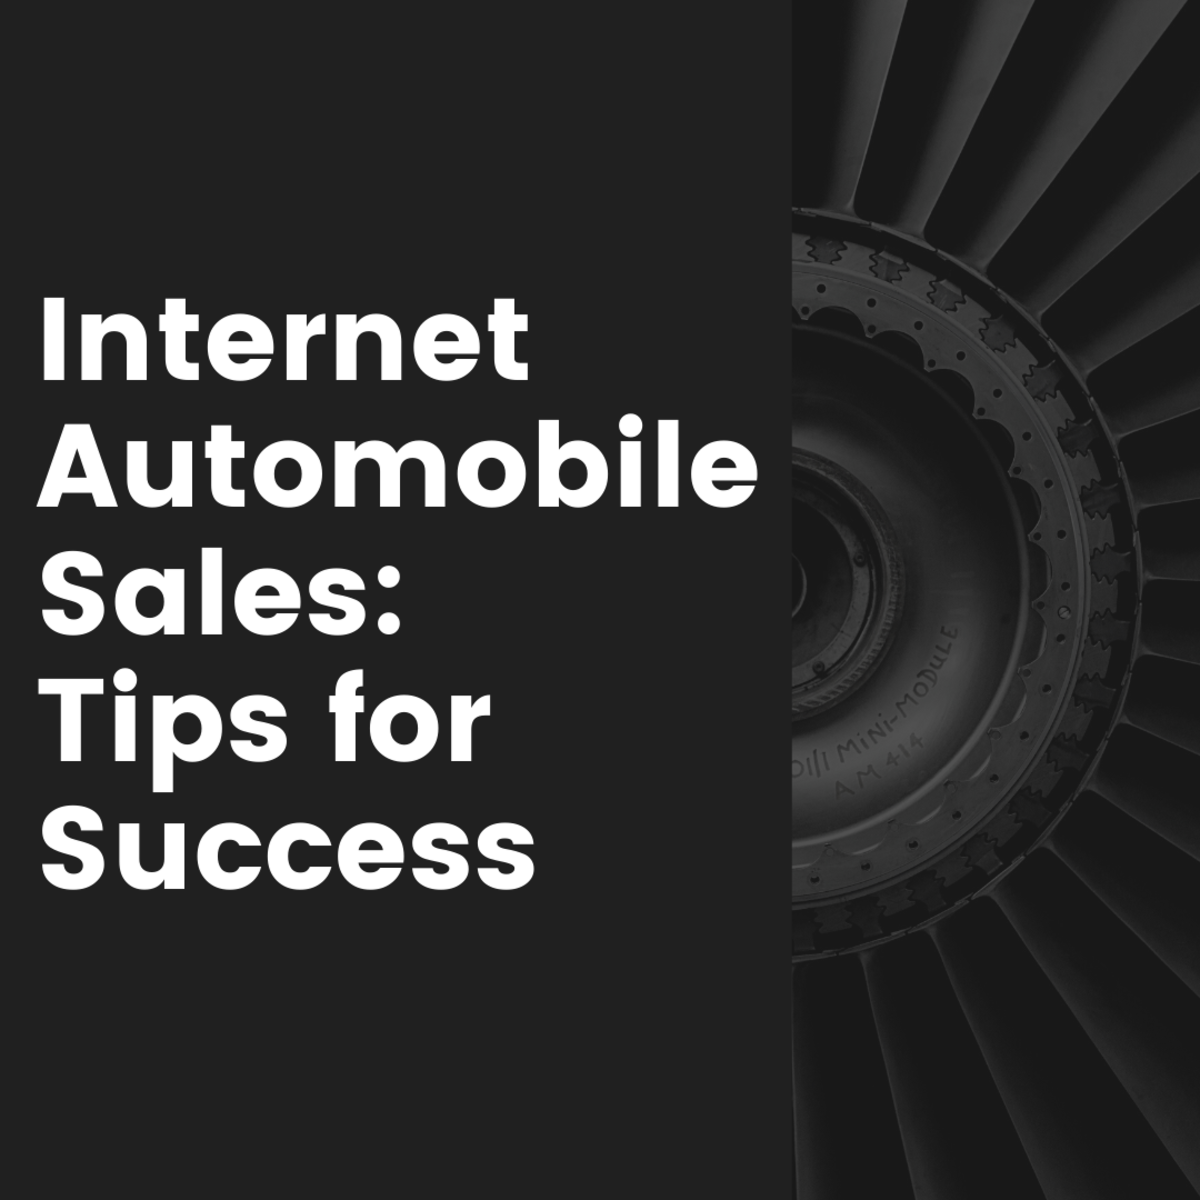 Get some advice from a sales professional about handling internet leads for car sales.